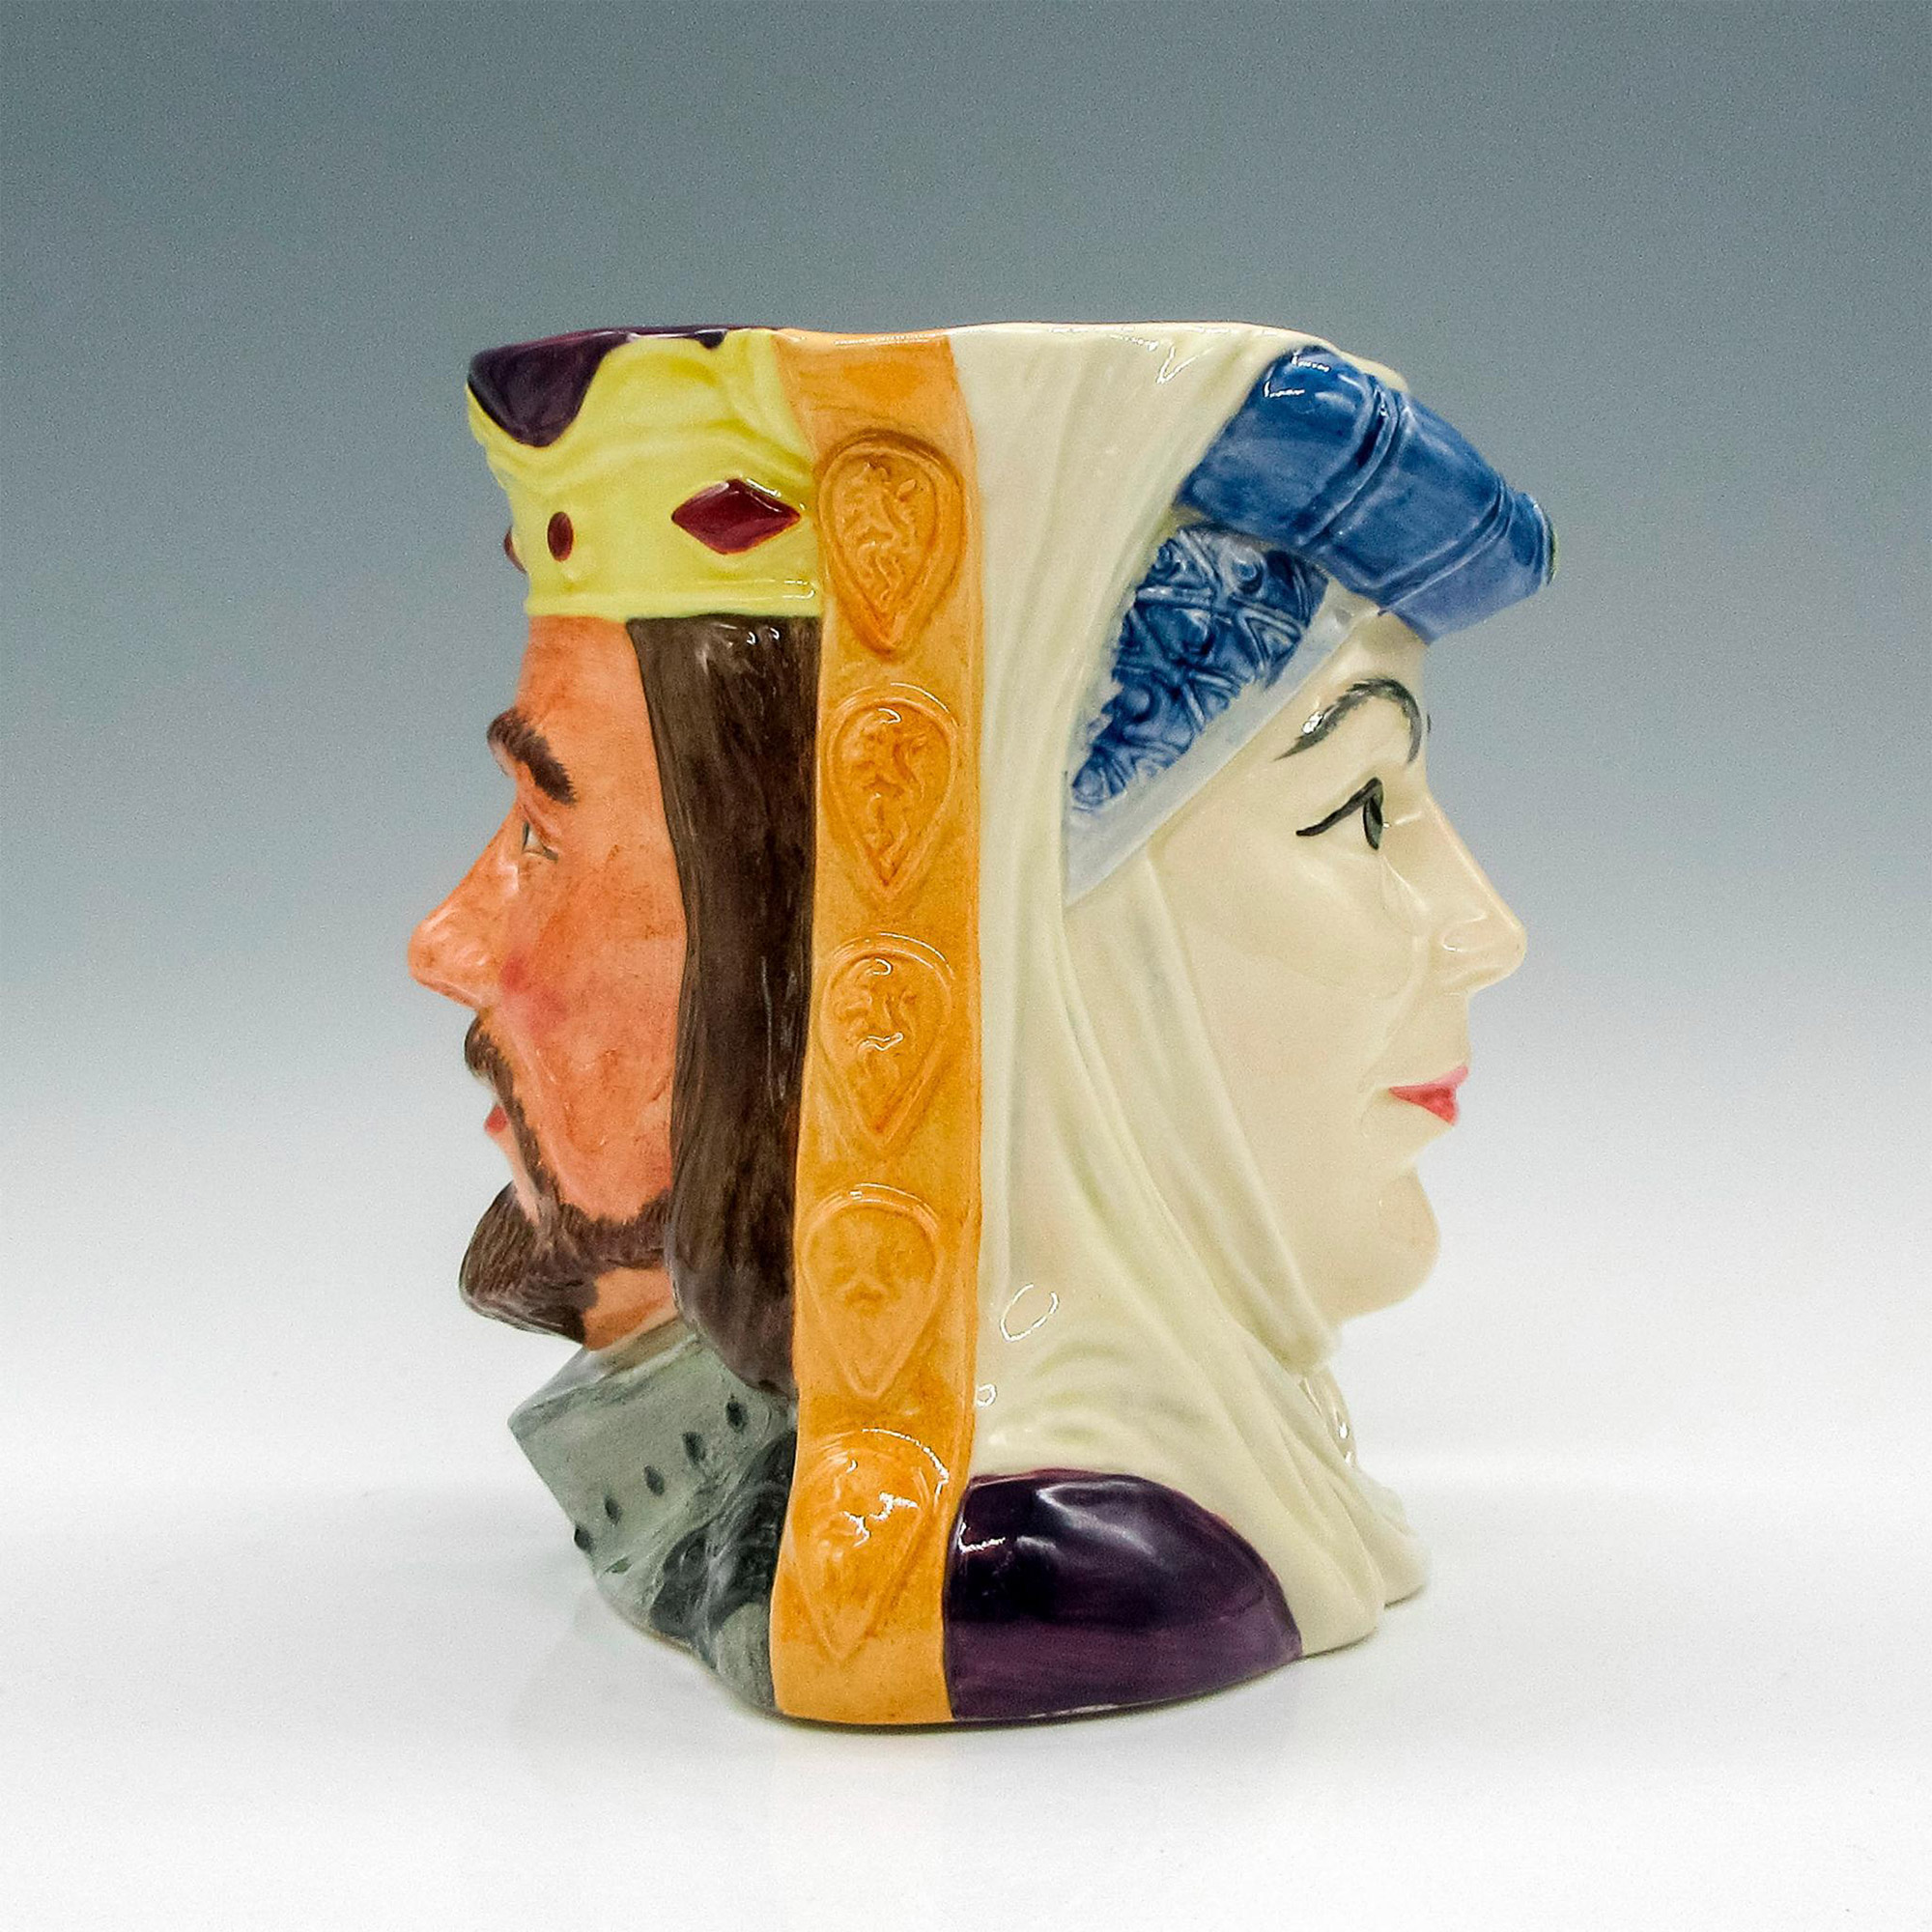 King Arthur and Guinevere D6836 - Large - Royal Doulton Character Jug - Image 4 of 5